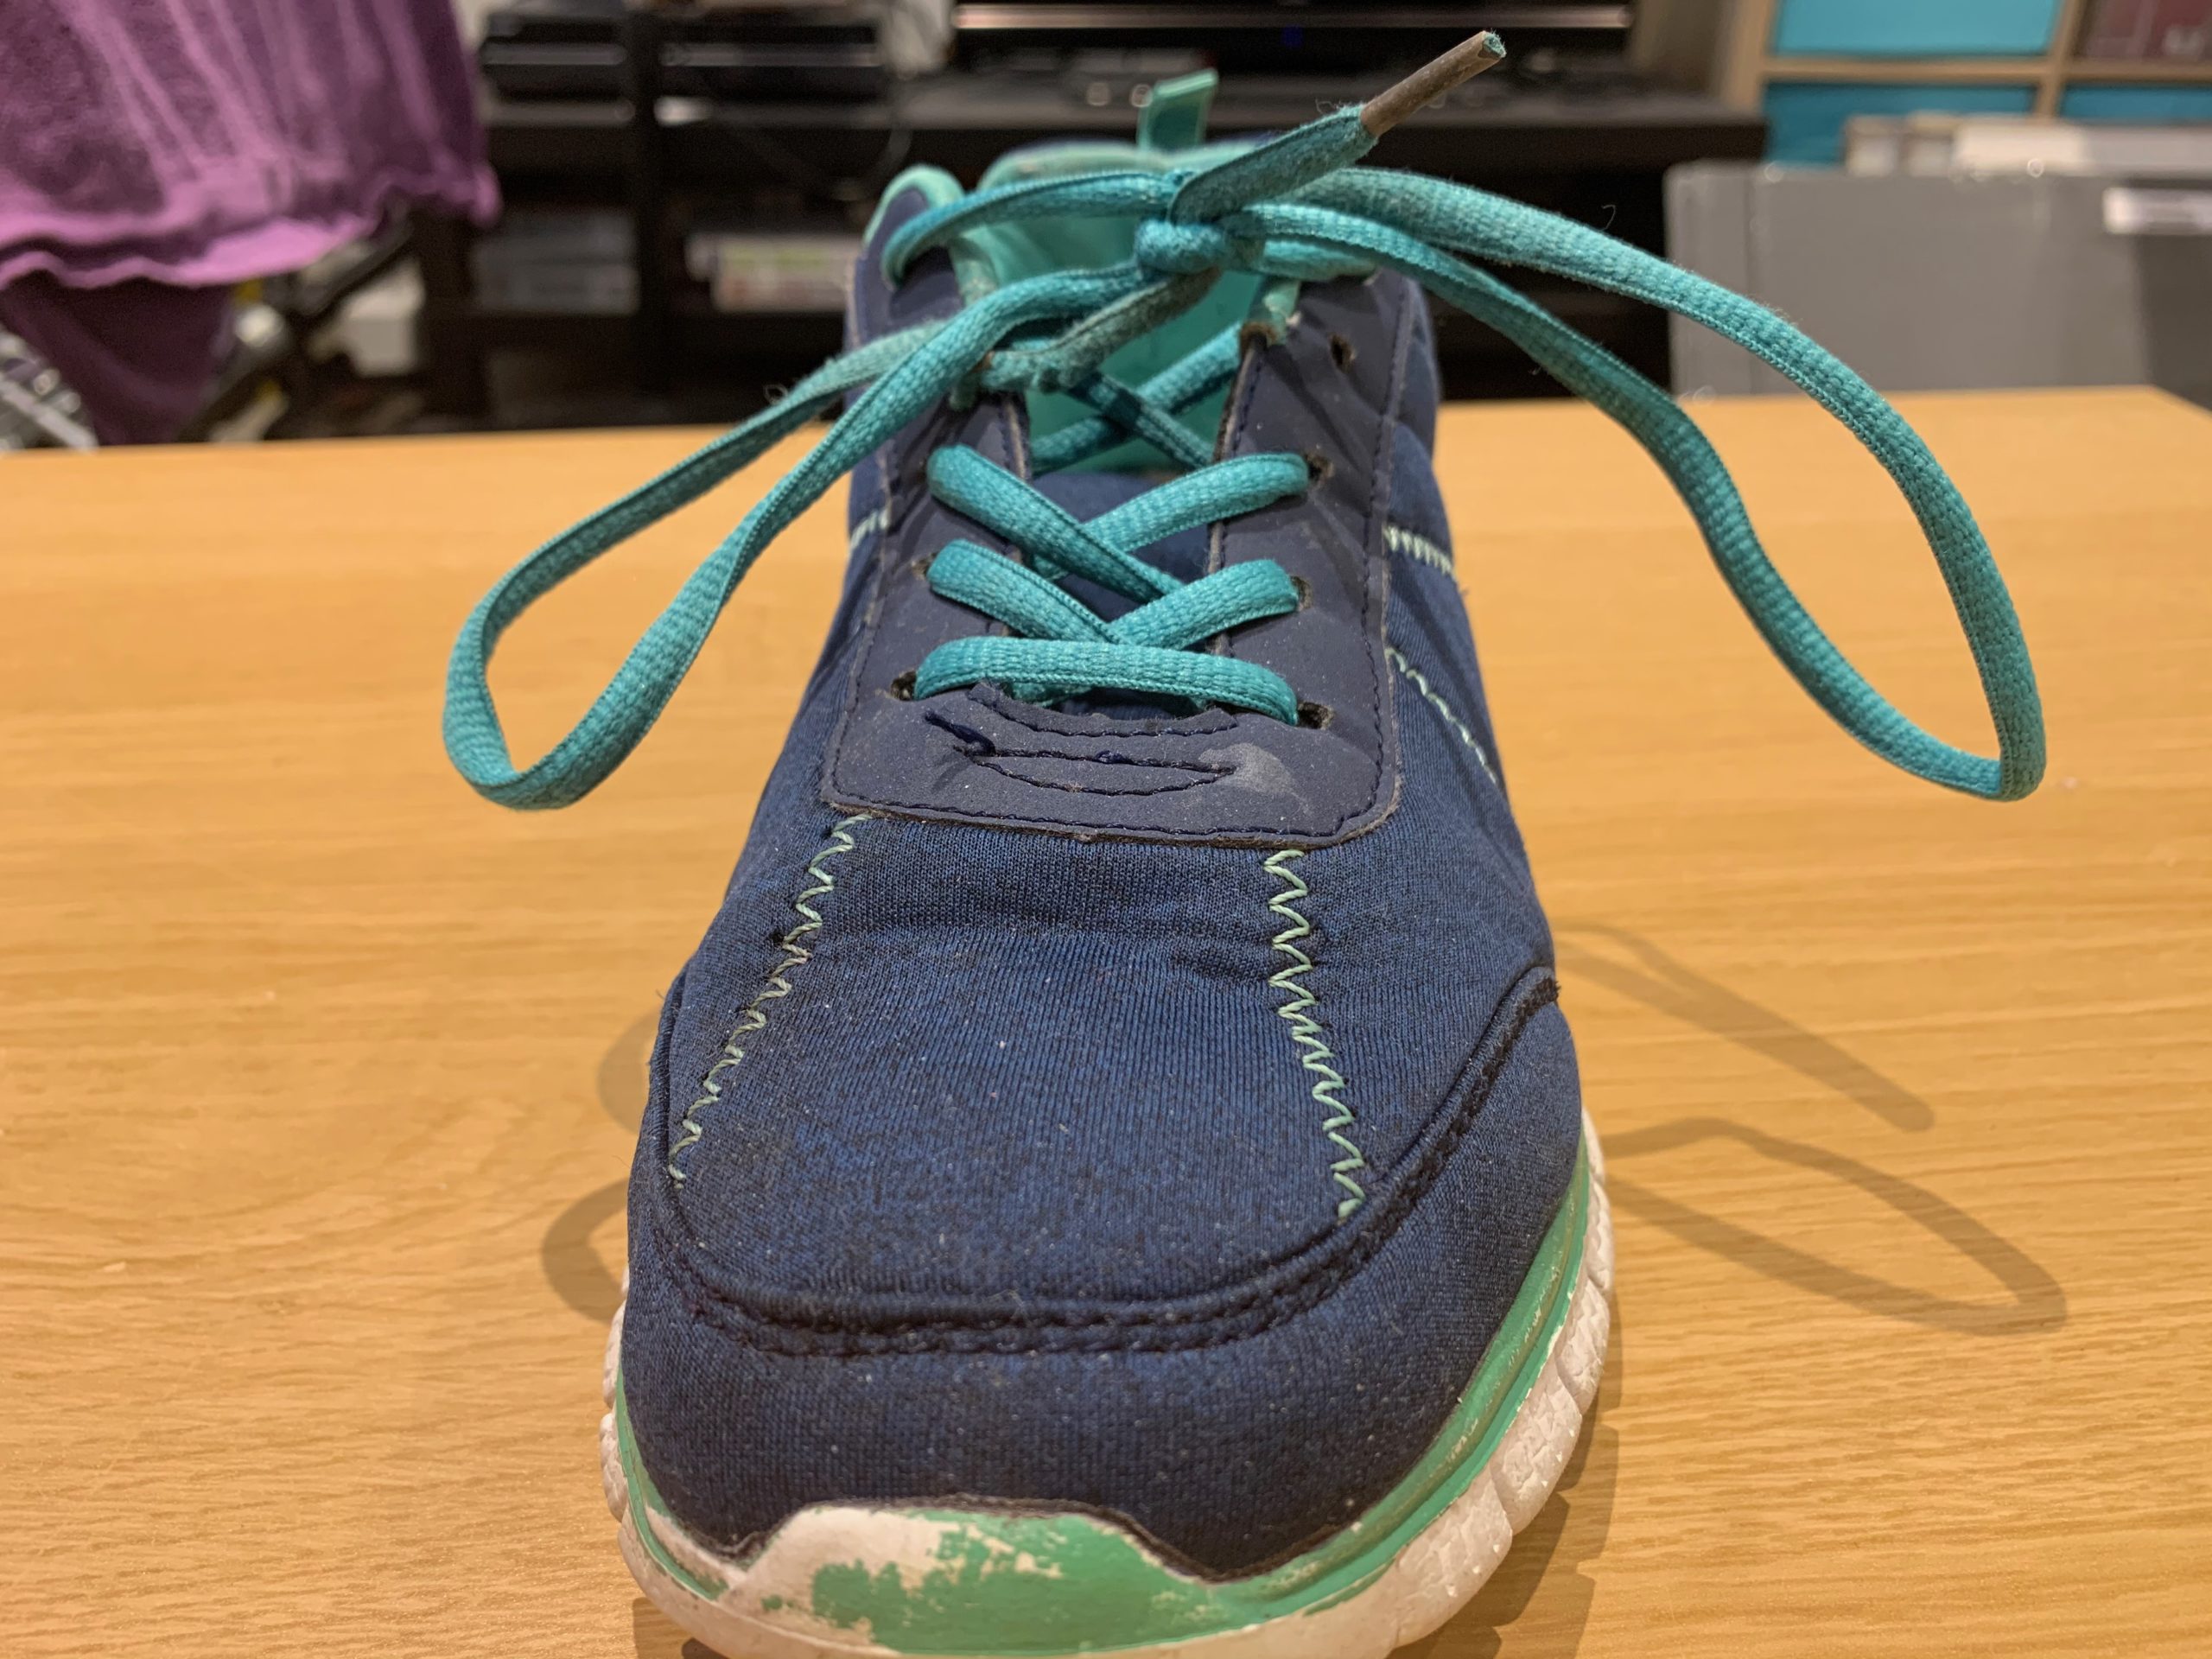 A navy and teal trainer with its laces done up.